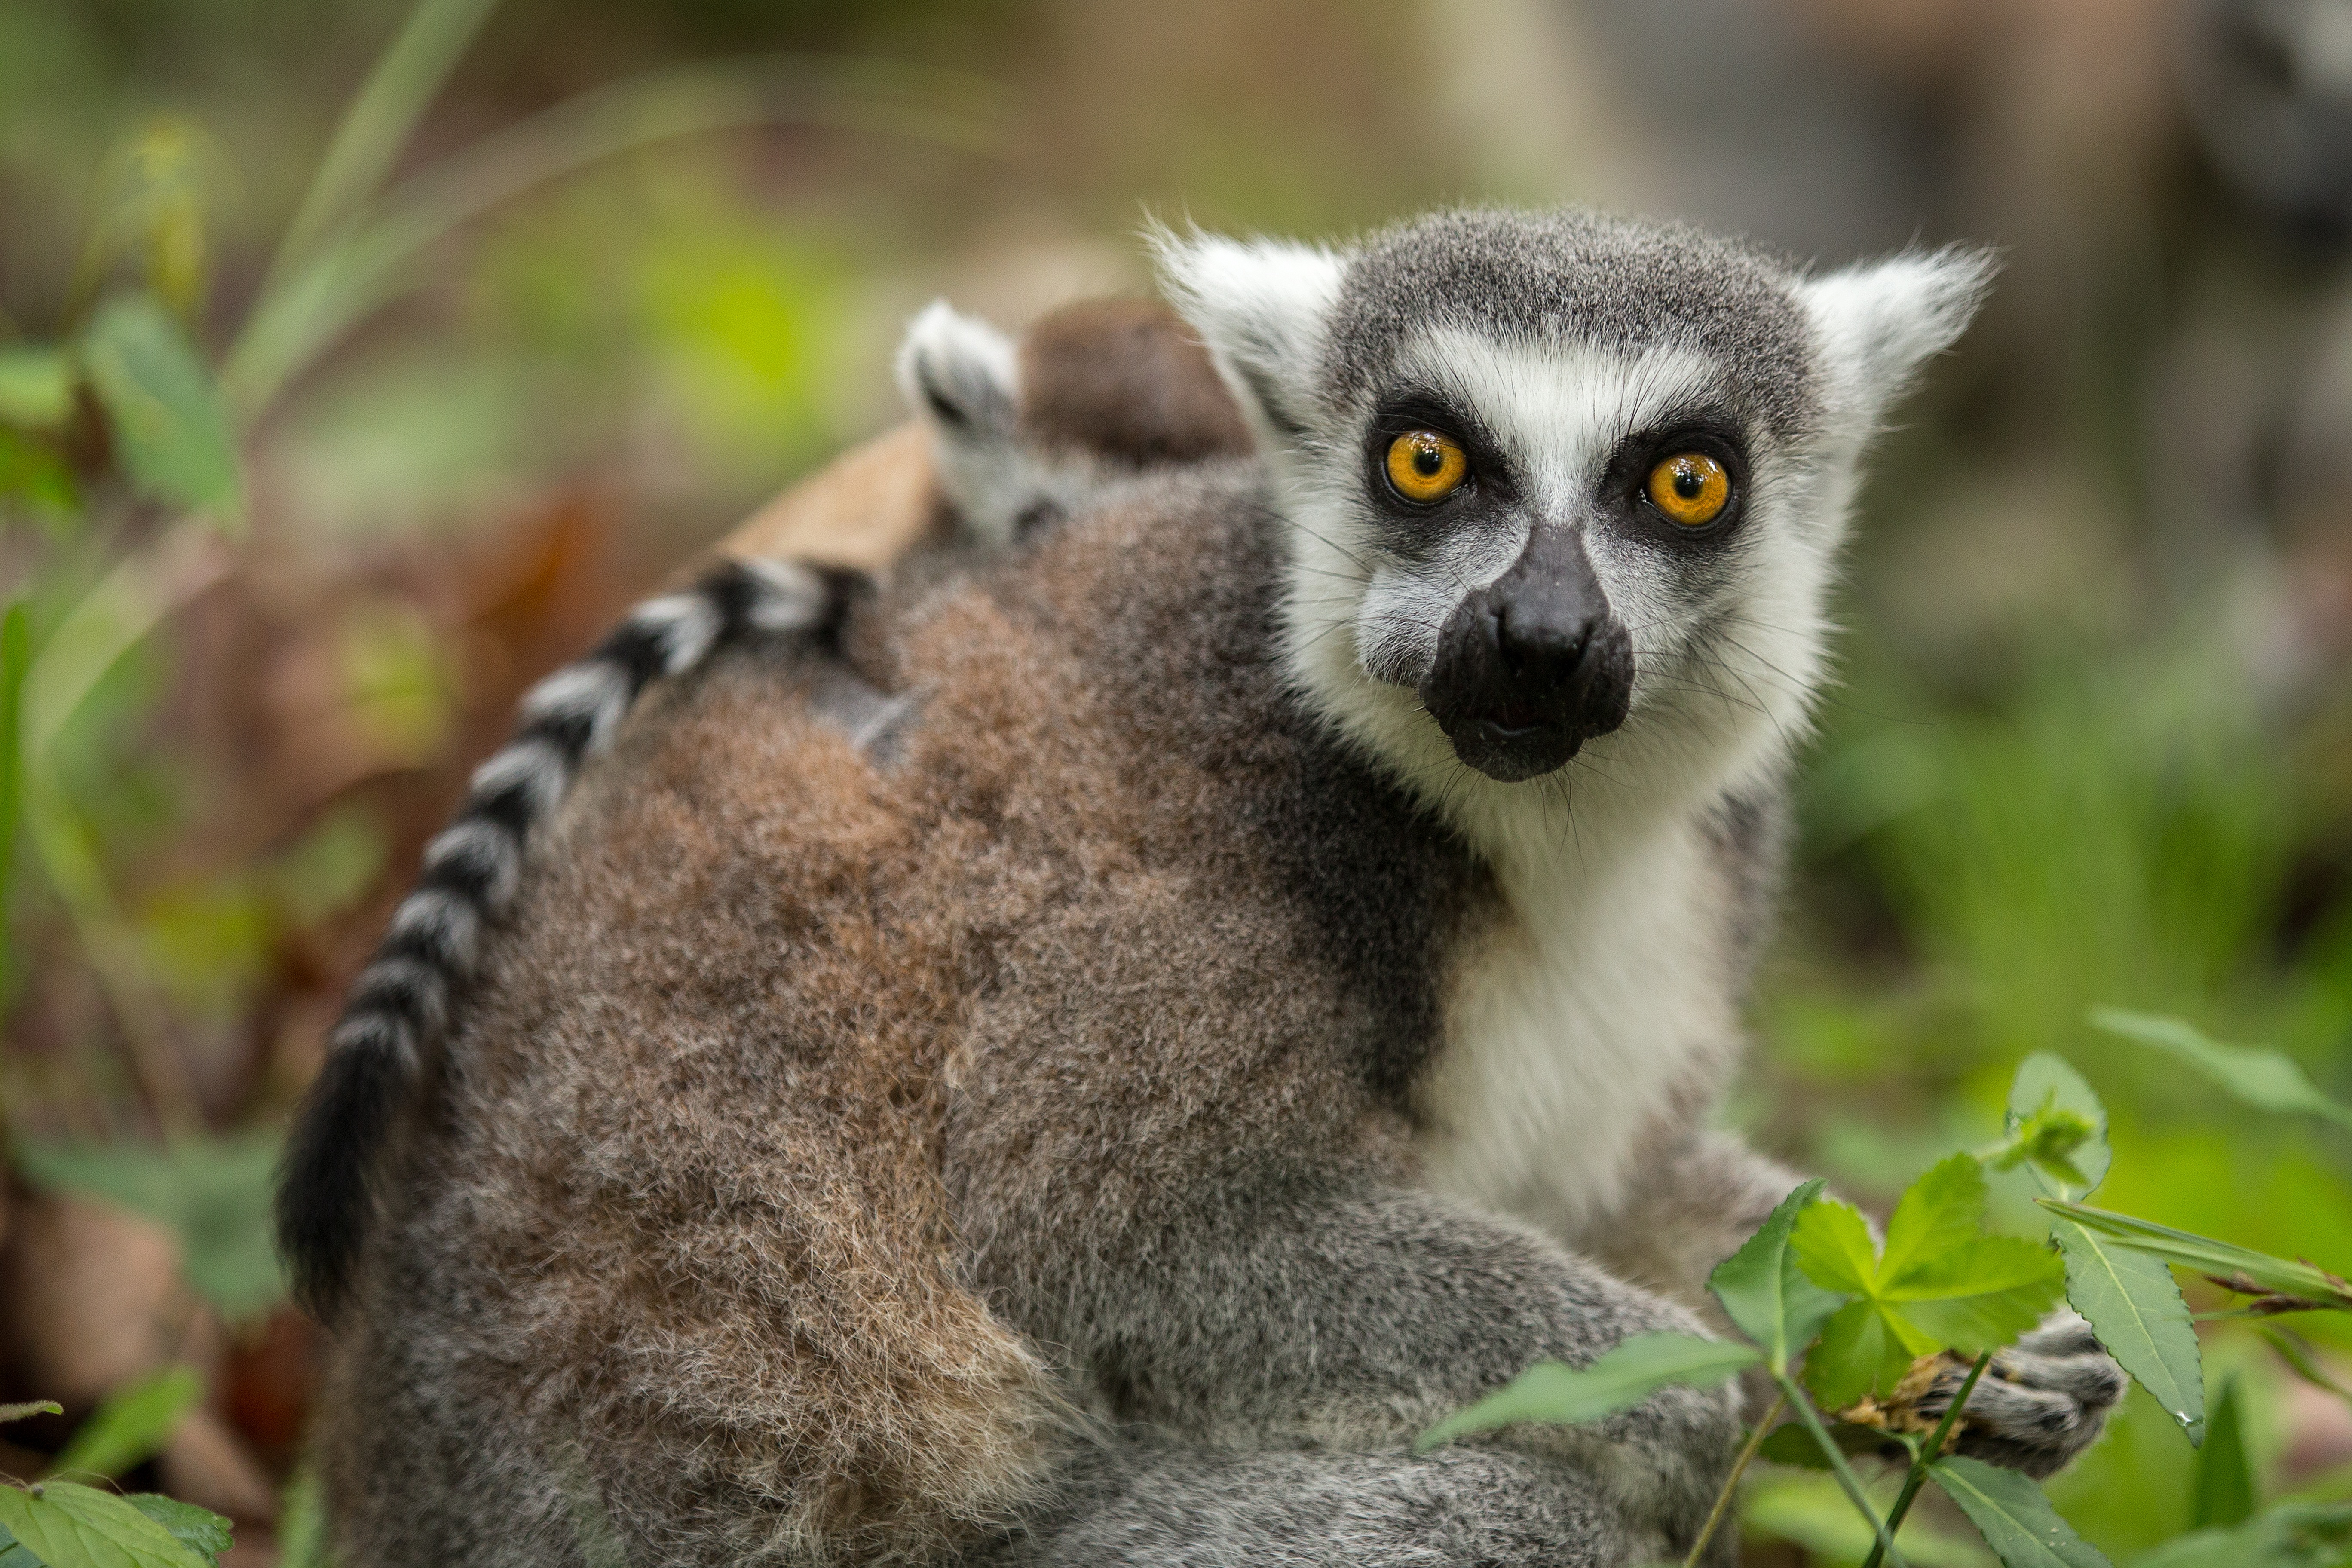 animals, food, grass, young, lemur, joey wallpaper for mobile